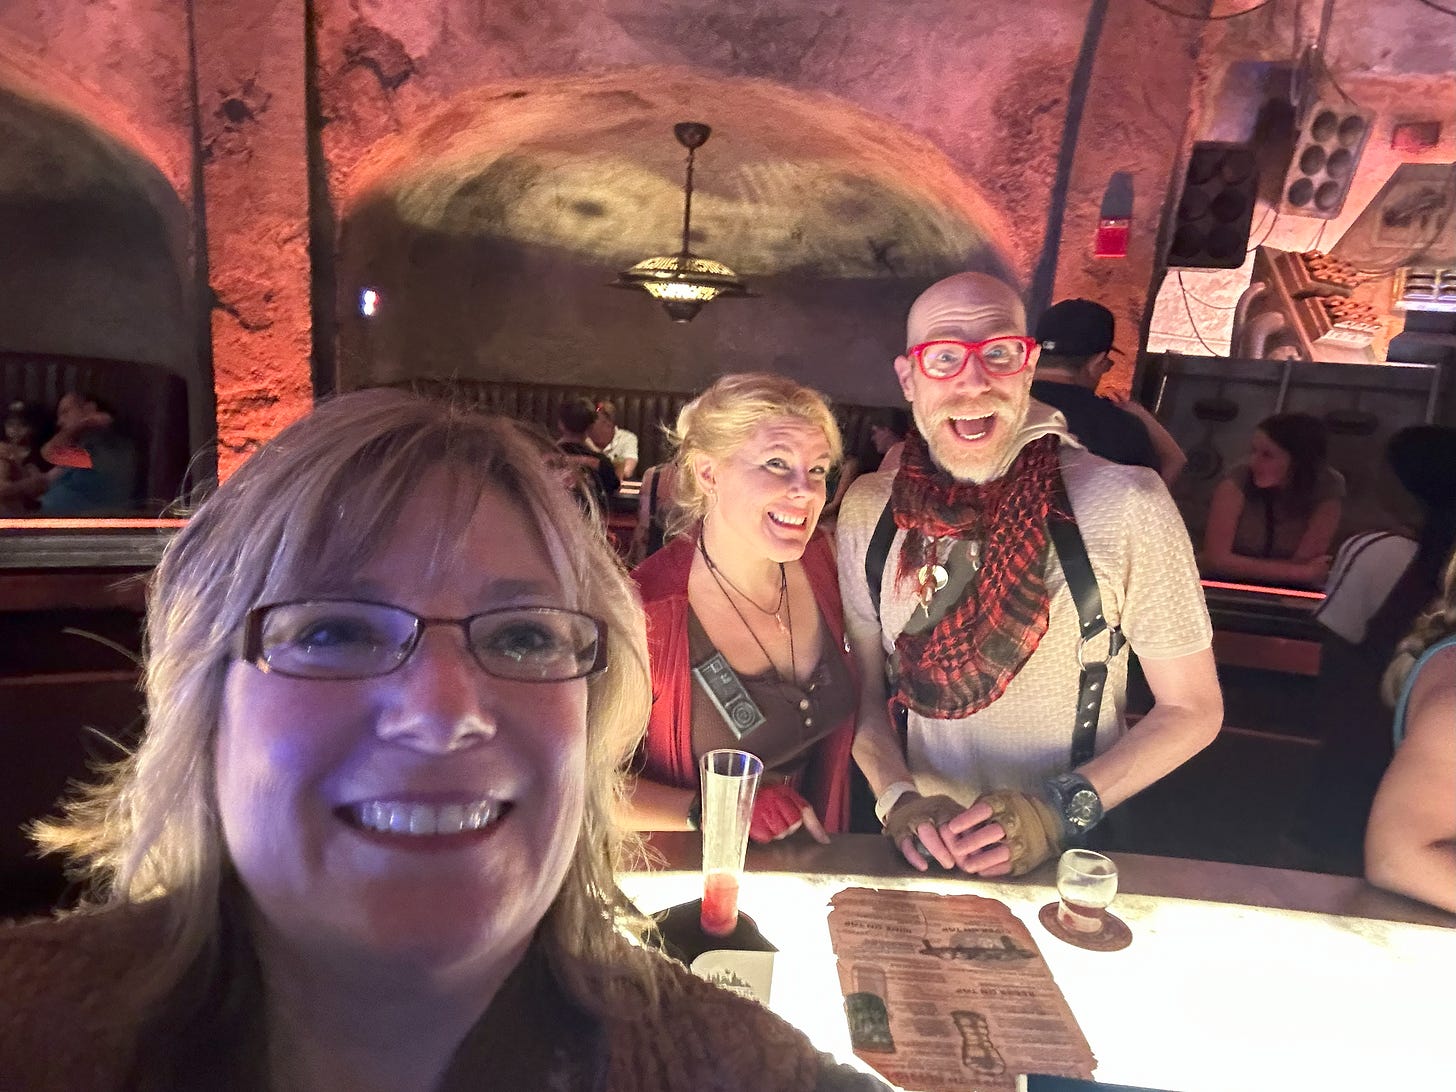 Cass and Noah inside Oga's Cantina, in a selfie taken by their bartender